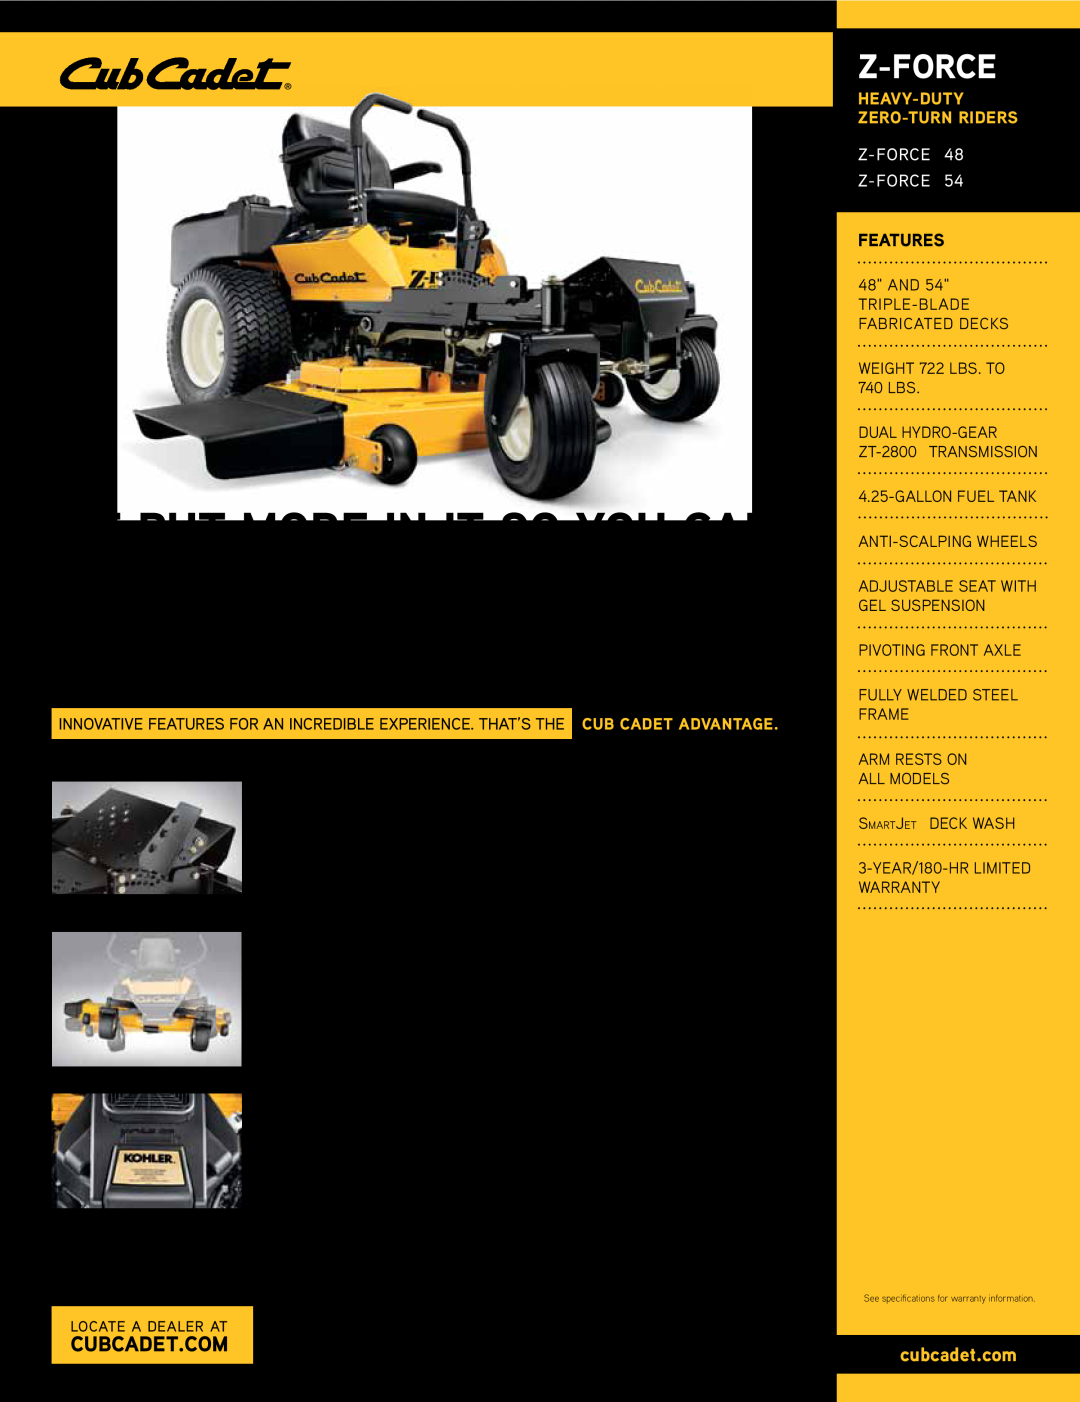 Cub Cadet 54, 48 warranty Z-Force, Spend More Time Off It, We Put More In It So You Can, Cubcadet.Com, Easier To Operate 